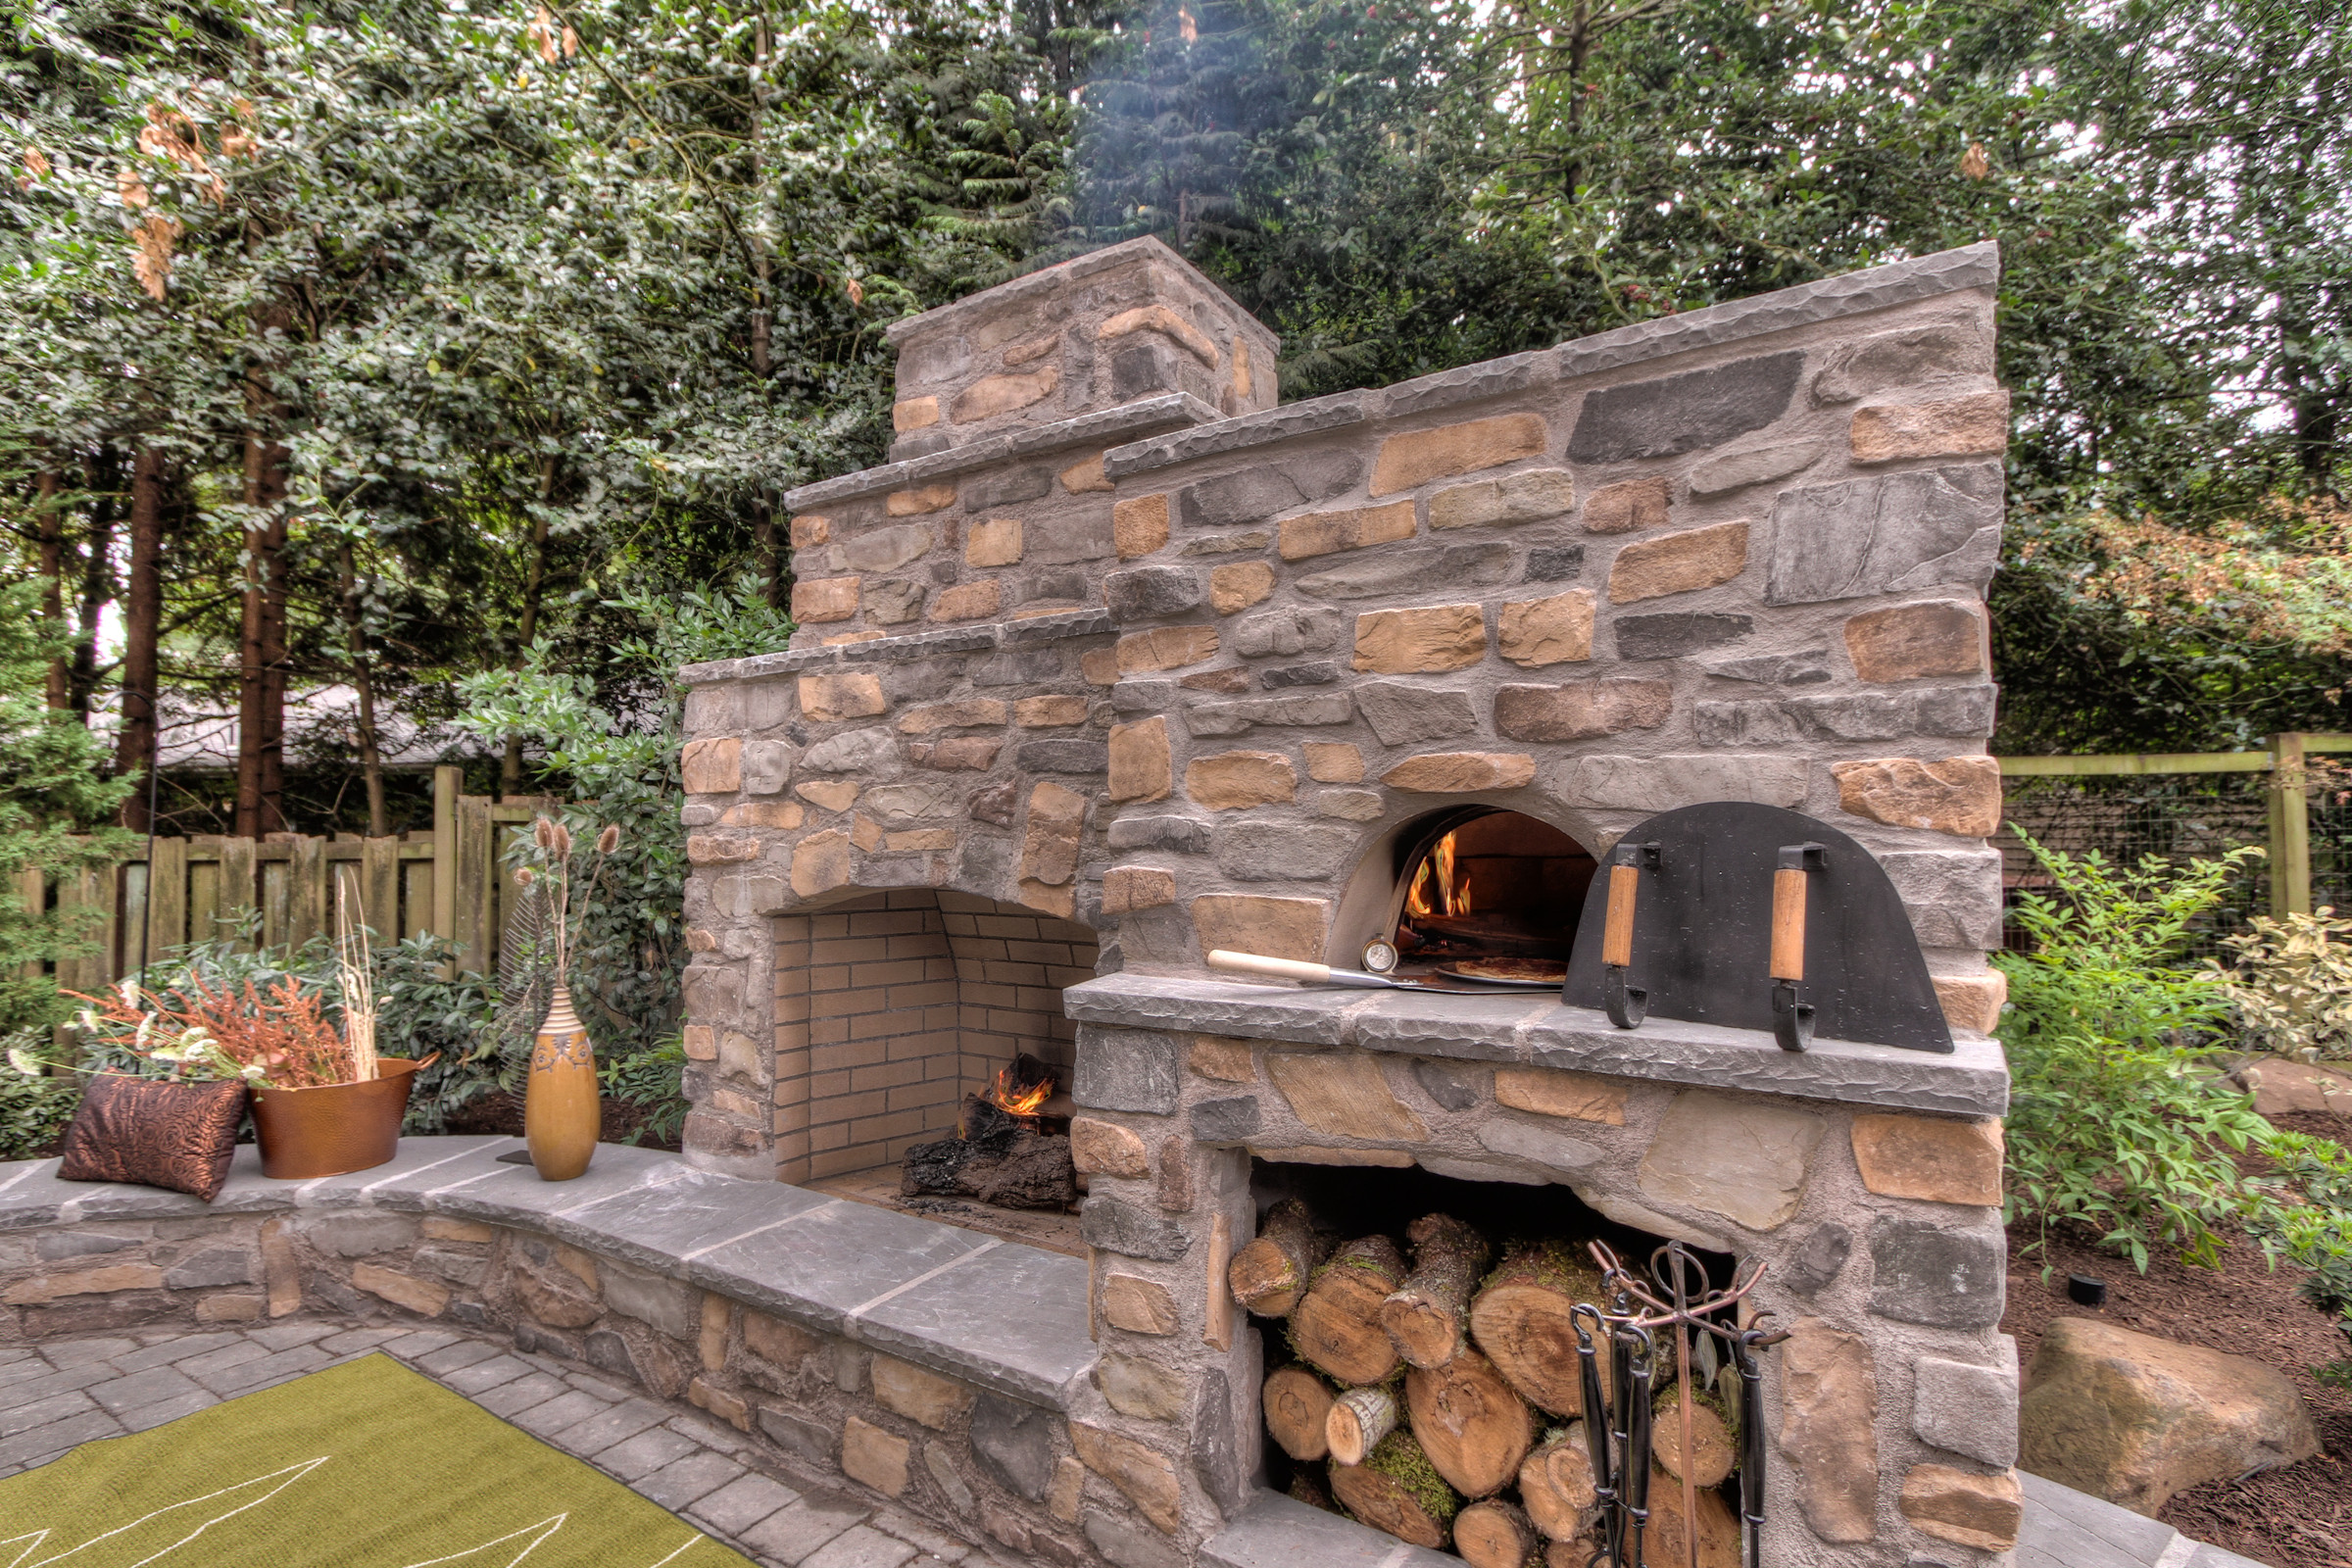 Outdoor Fireplace With Pizza Oven, Outdoor Fireplace And Pizza Oven Ideas